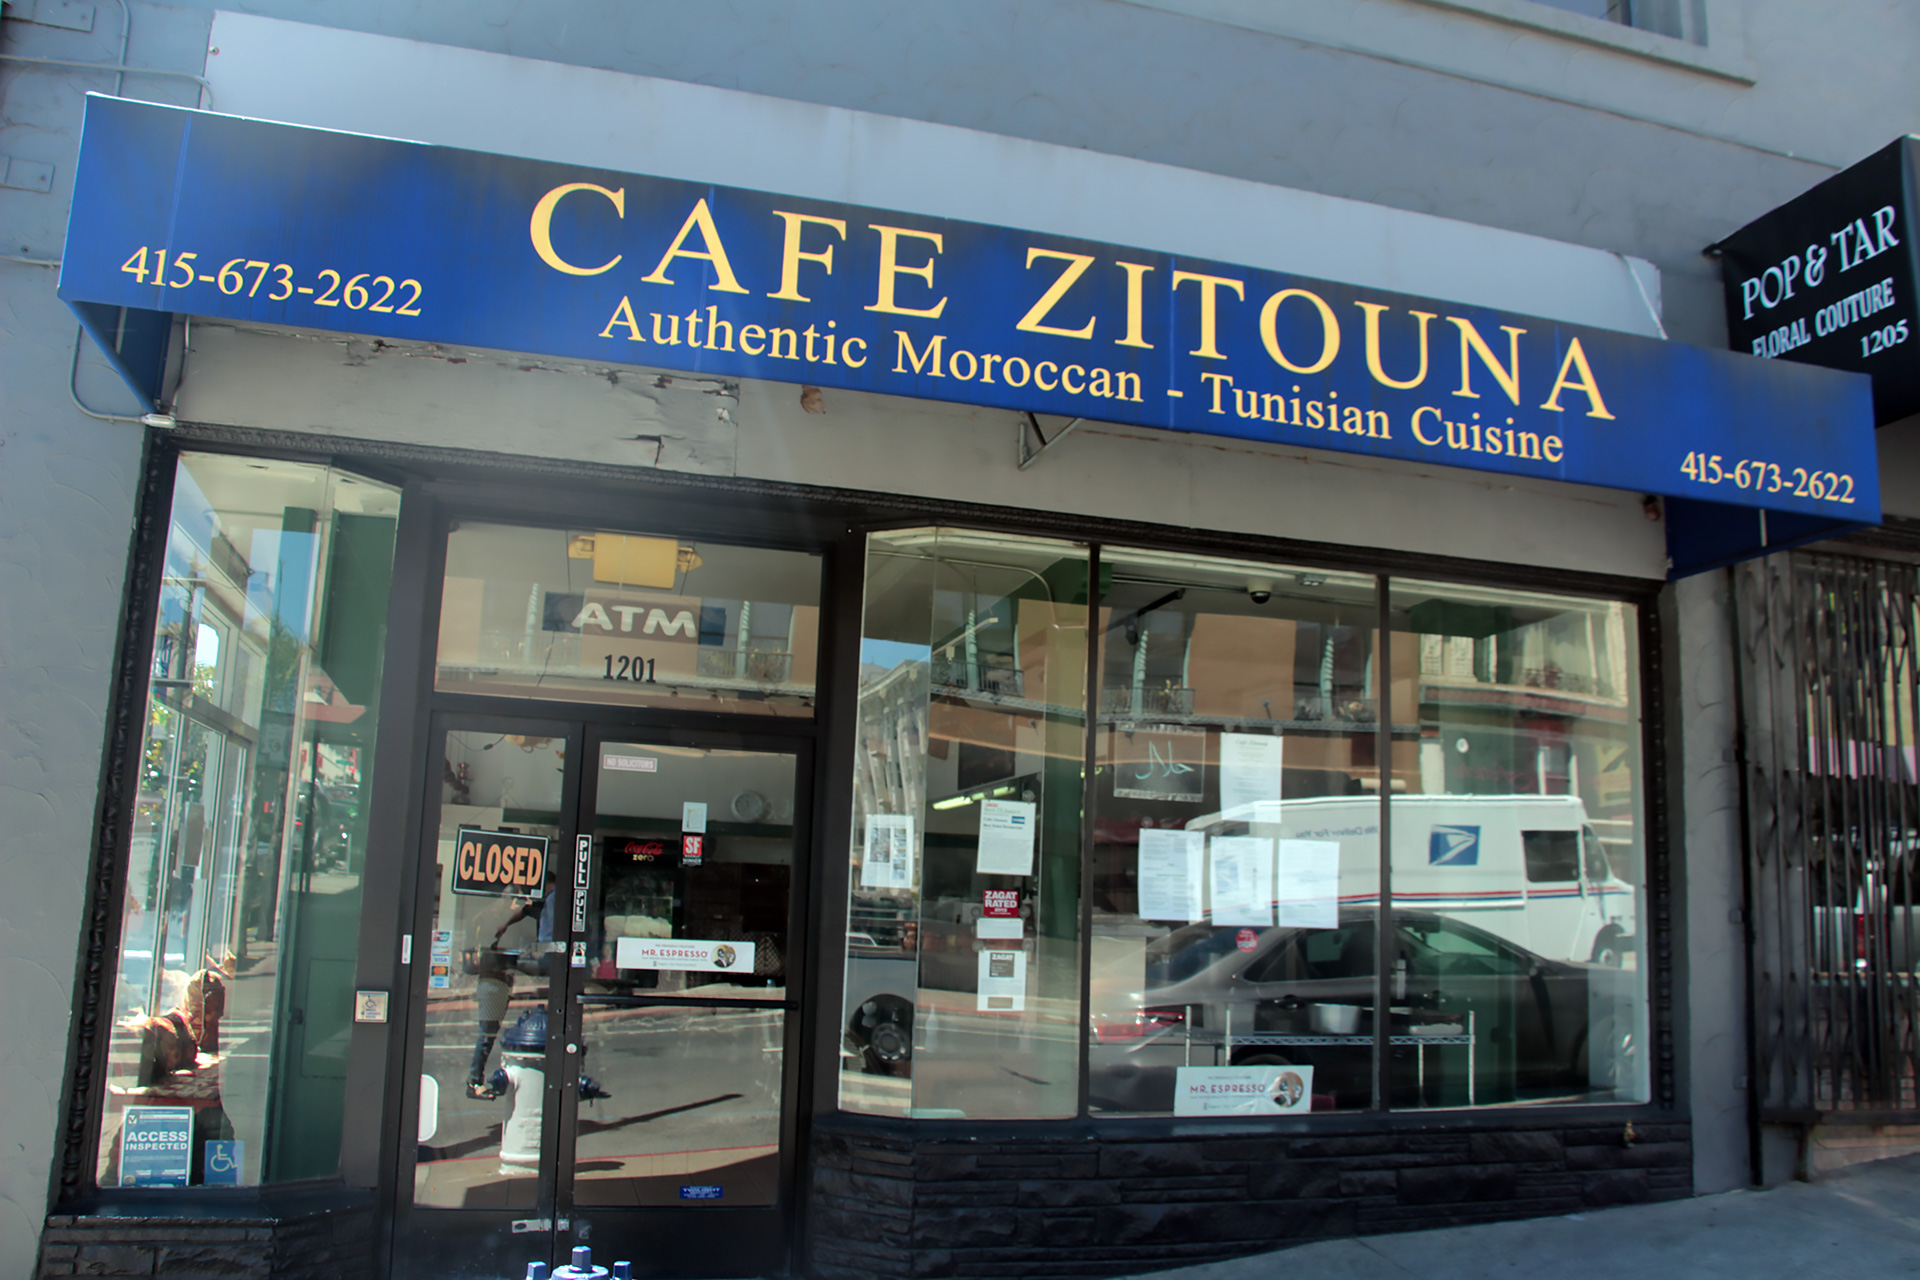 Cafe Zitouna in San Francisco's Lower Nob Hill.